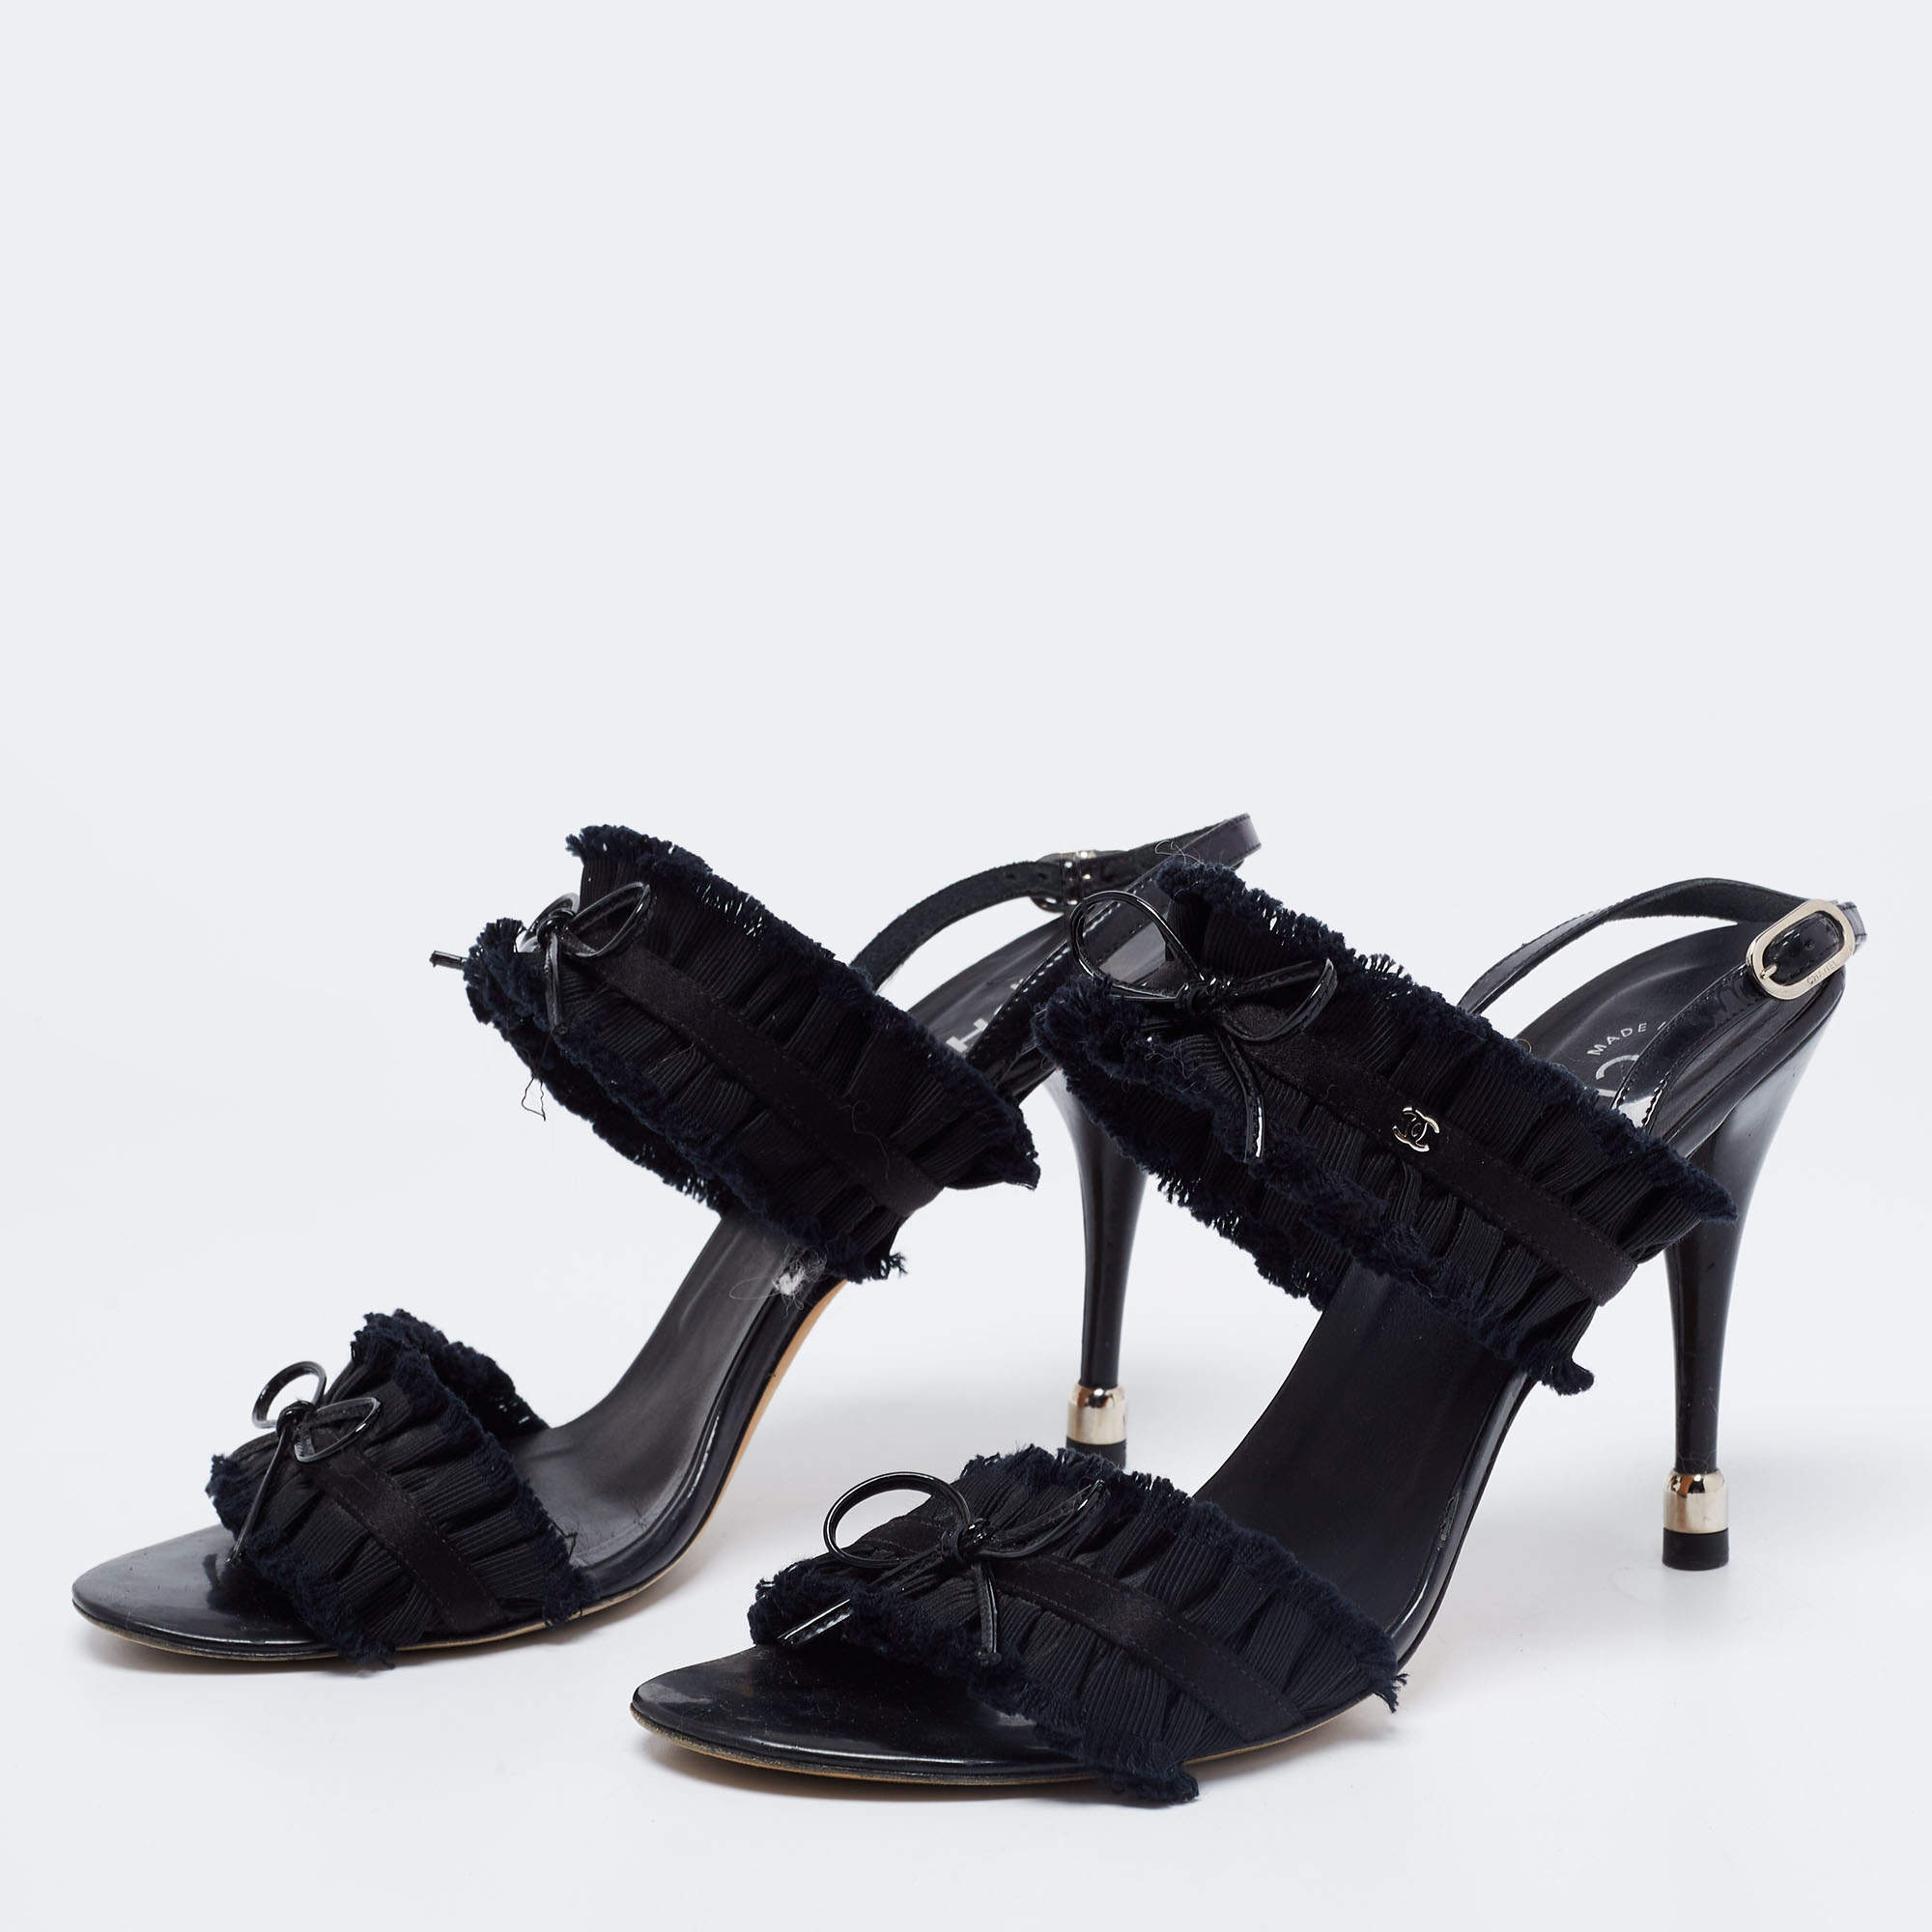 Chanel Black Satin and Fabric Ruffle Trim Bow Ankle Strap Sandals